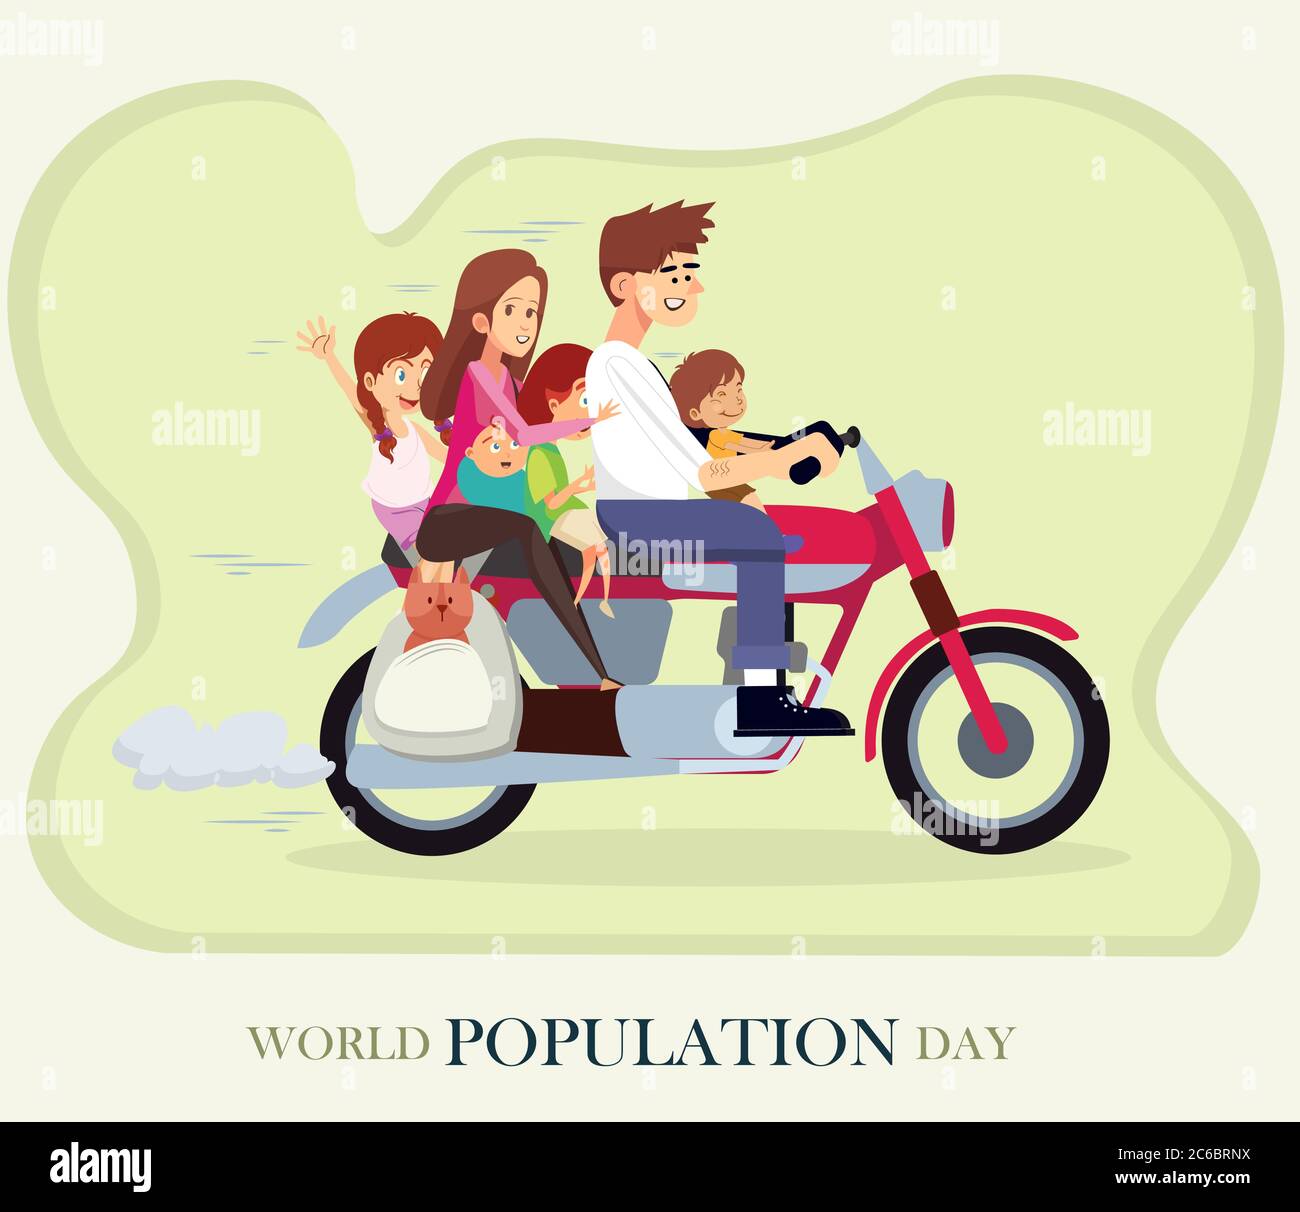 World population day, whole family with pet dog on motorbike, poster, illustration vector Stock Vector